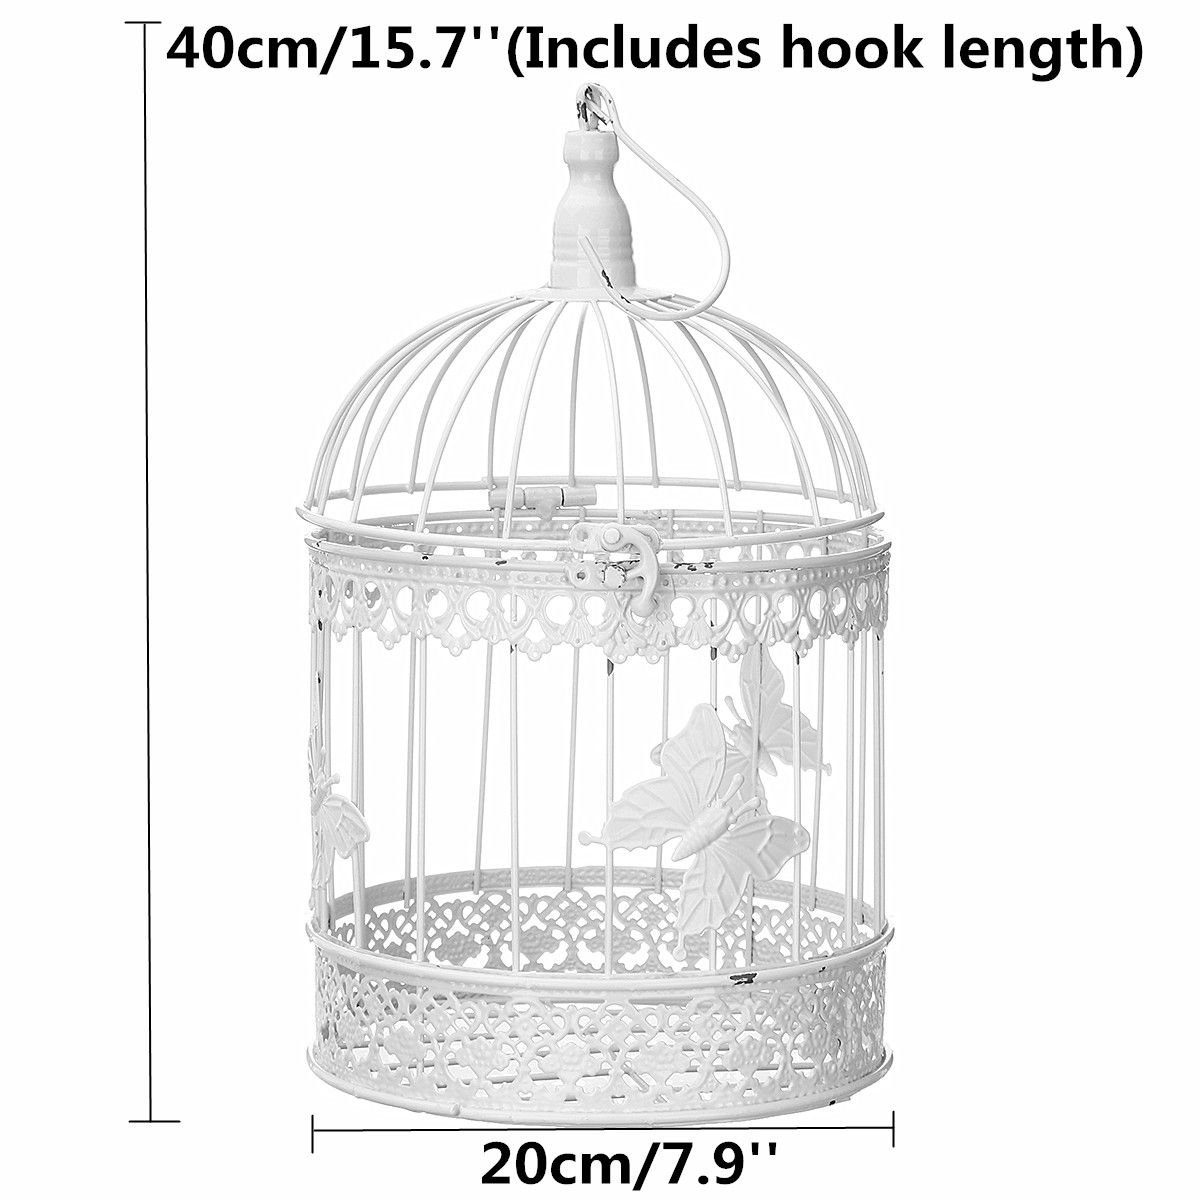 Wishing-Well-Bird-Cage-Wedding-White-Birdcage-Cards-Round-Box-Decorations-Ornaments-1557365